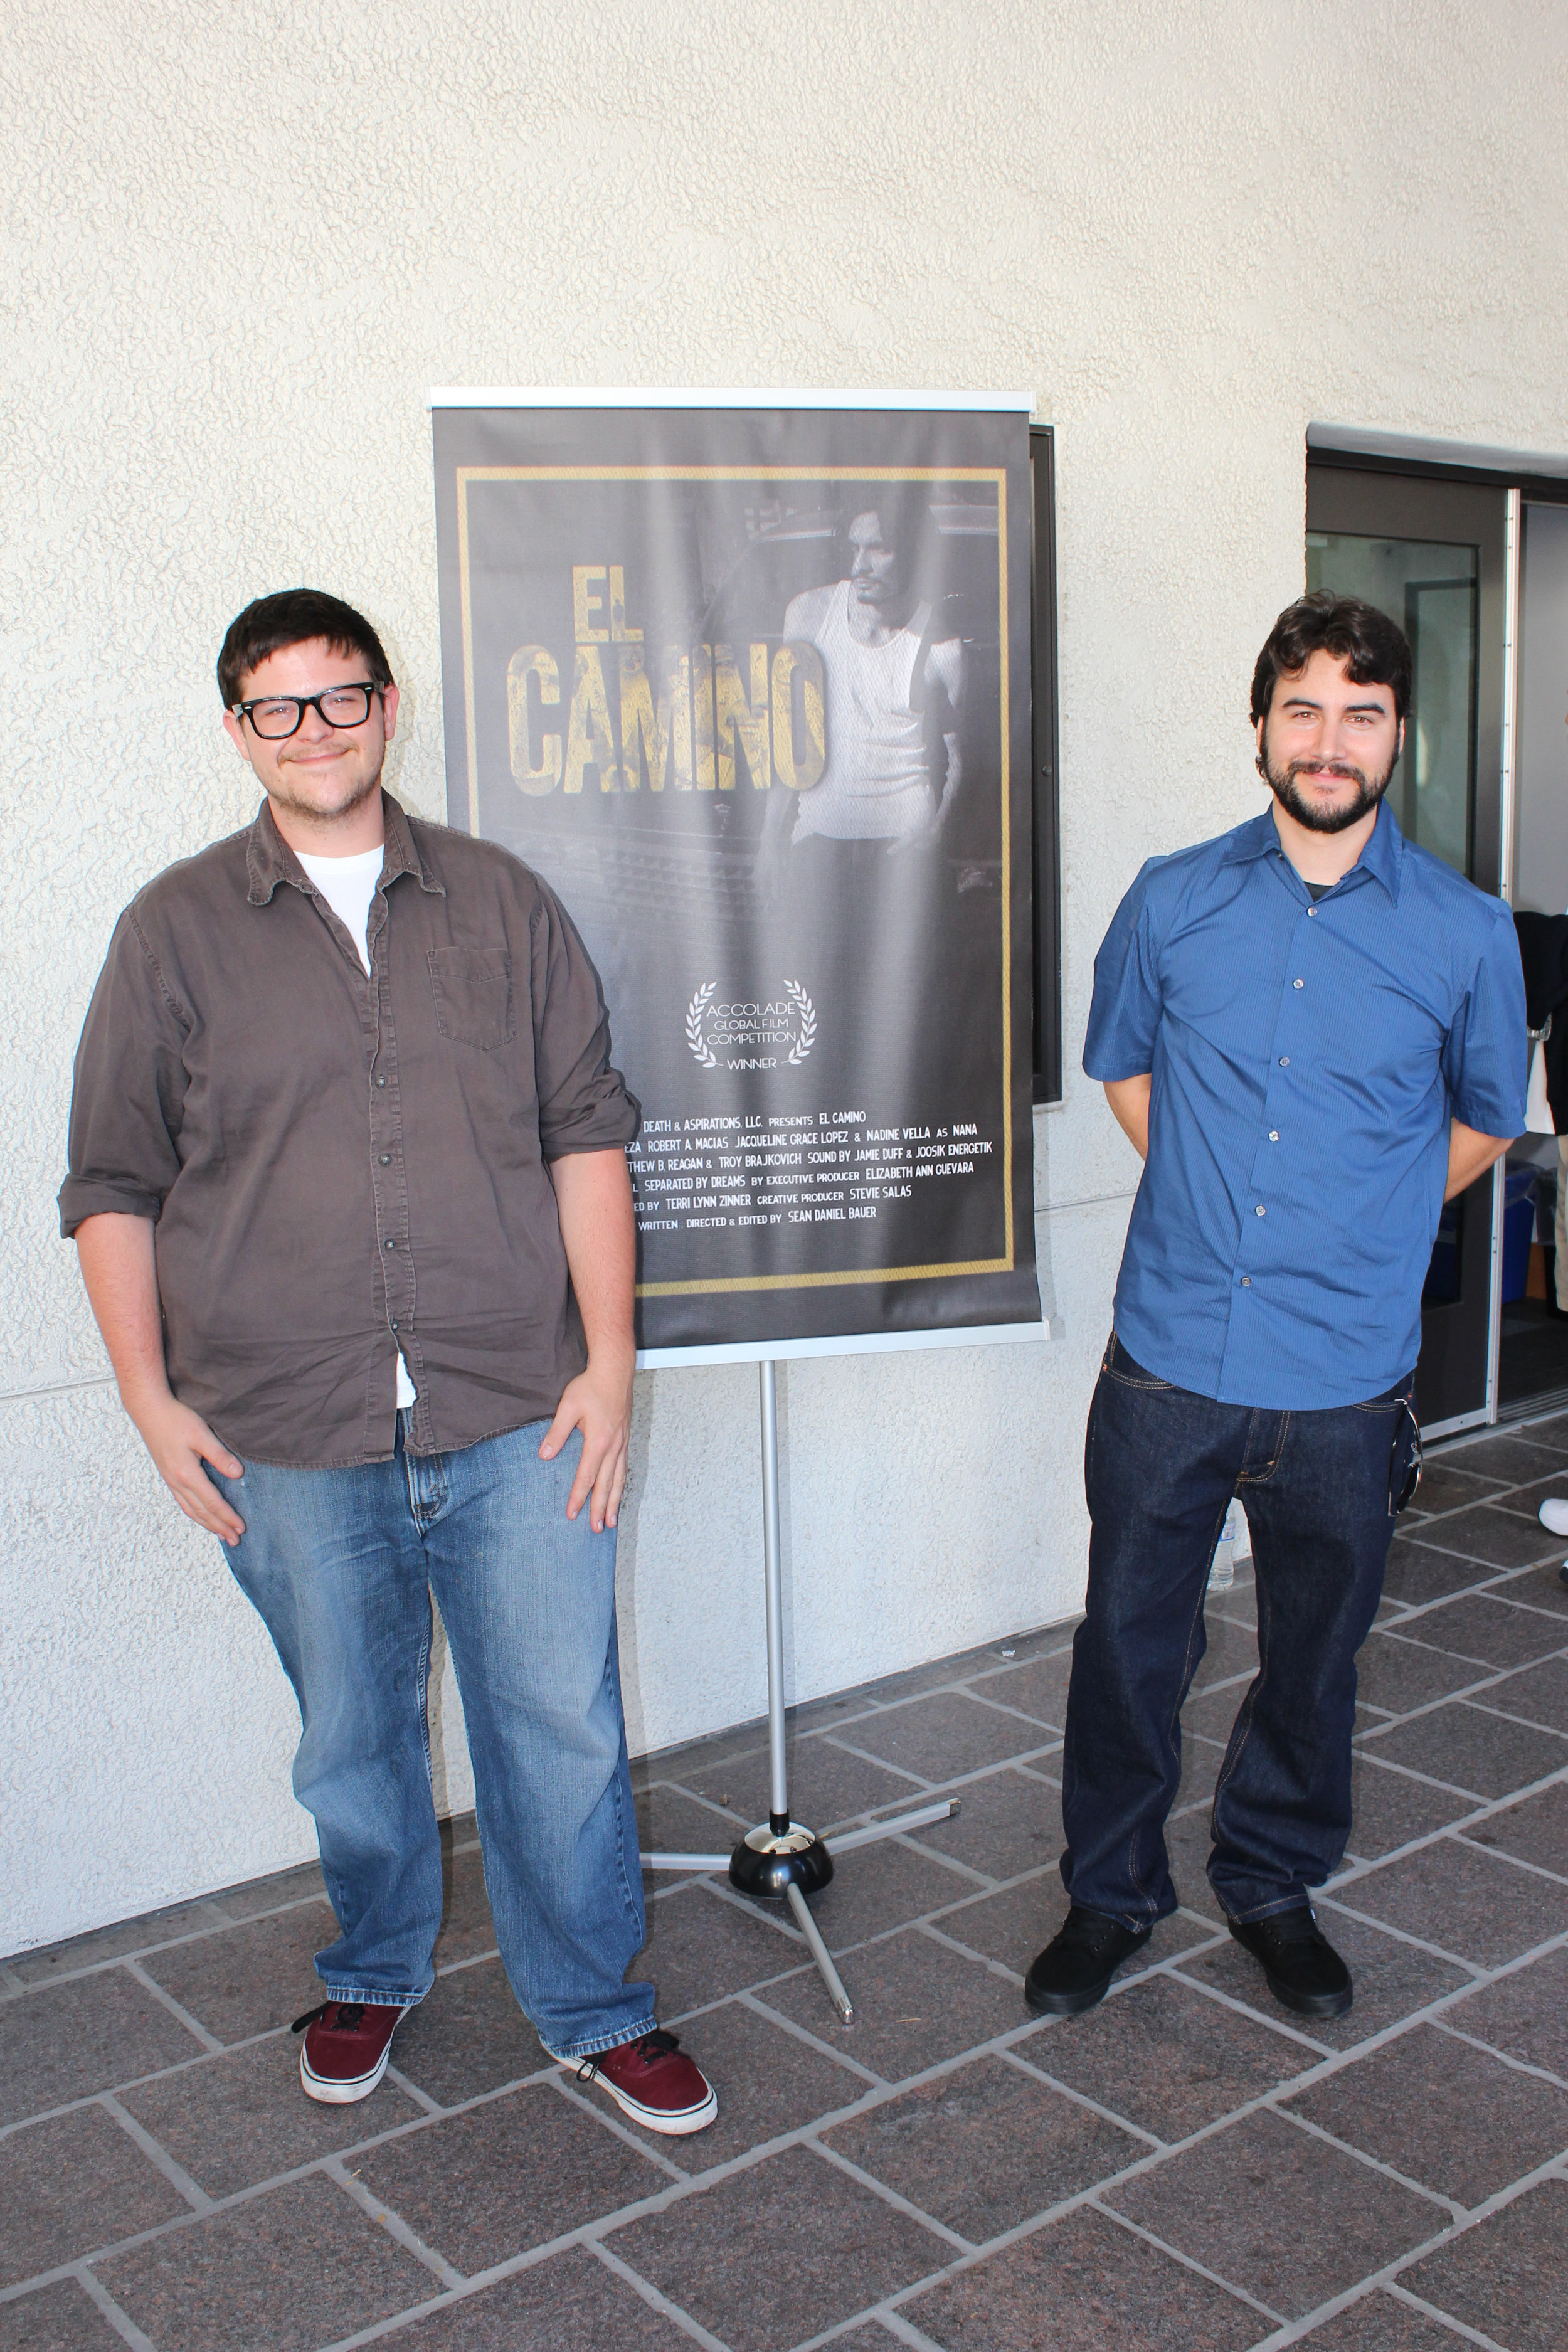 Alec Moore and Sean Daniel Bauer in front of the official El Camino poster.